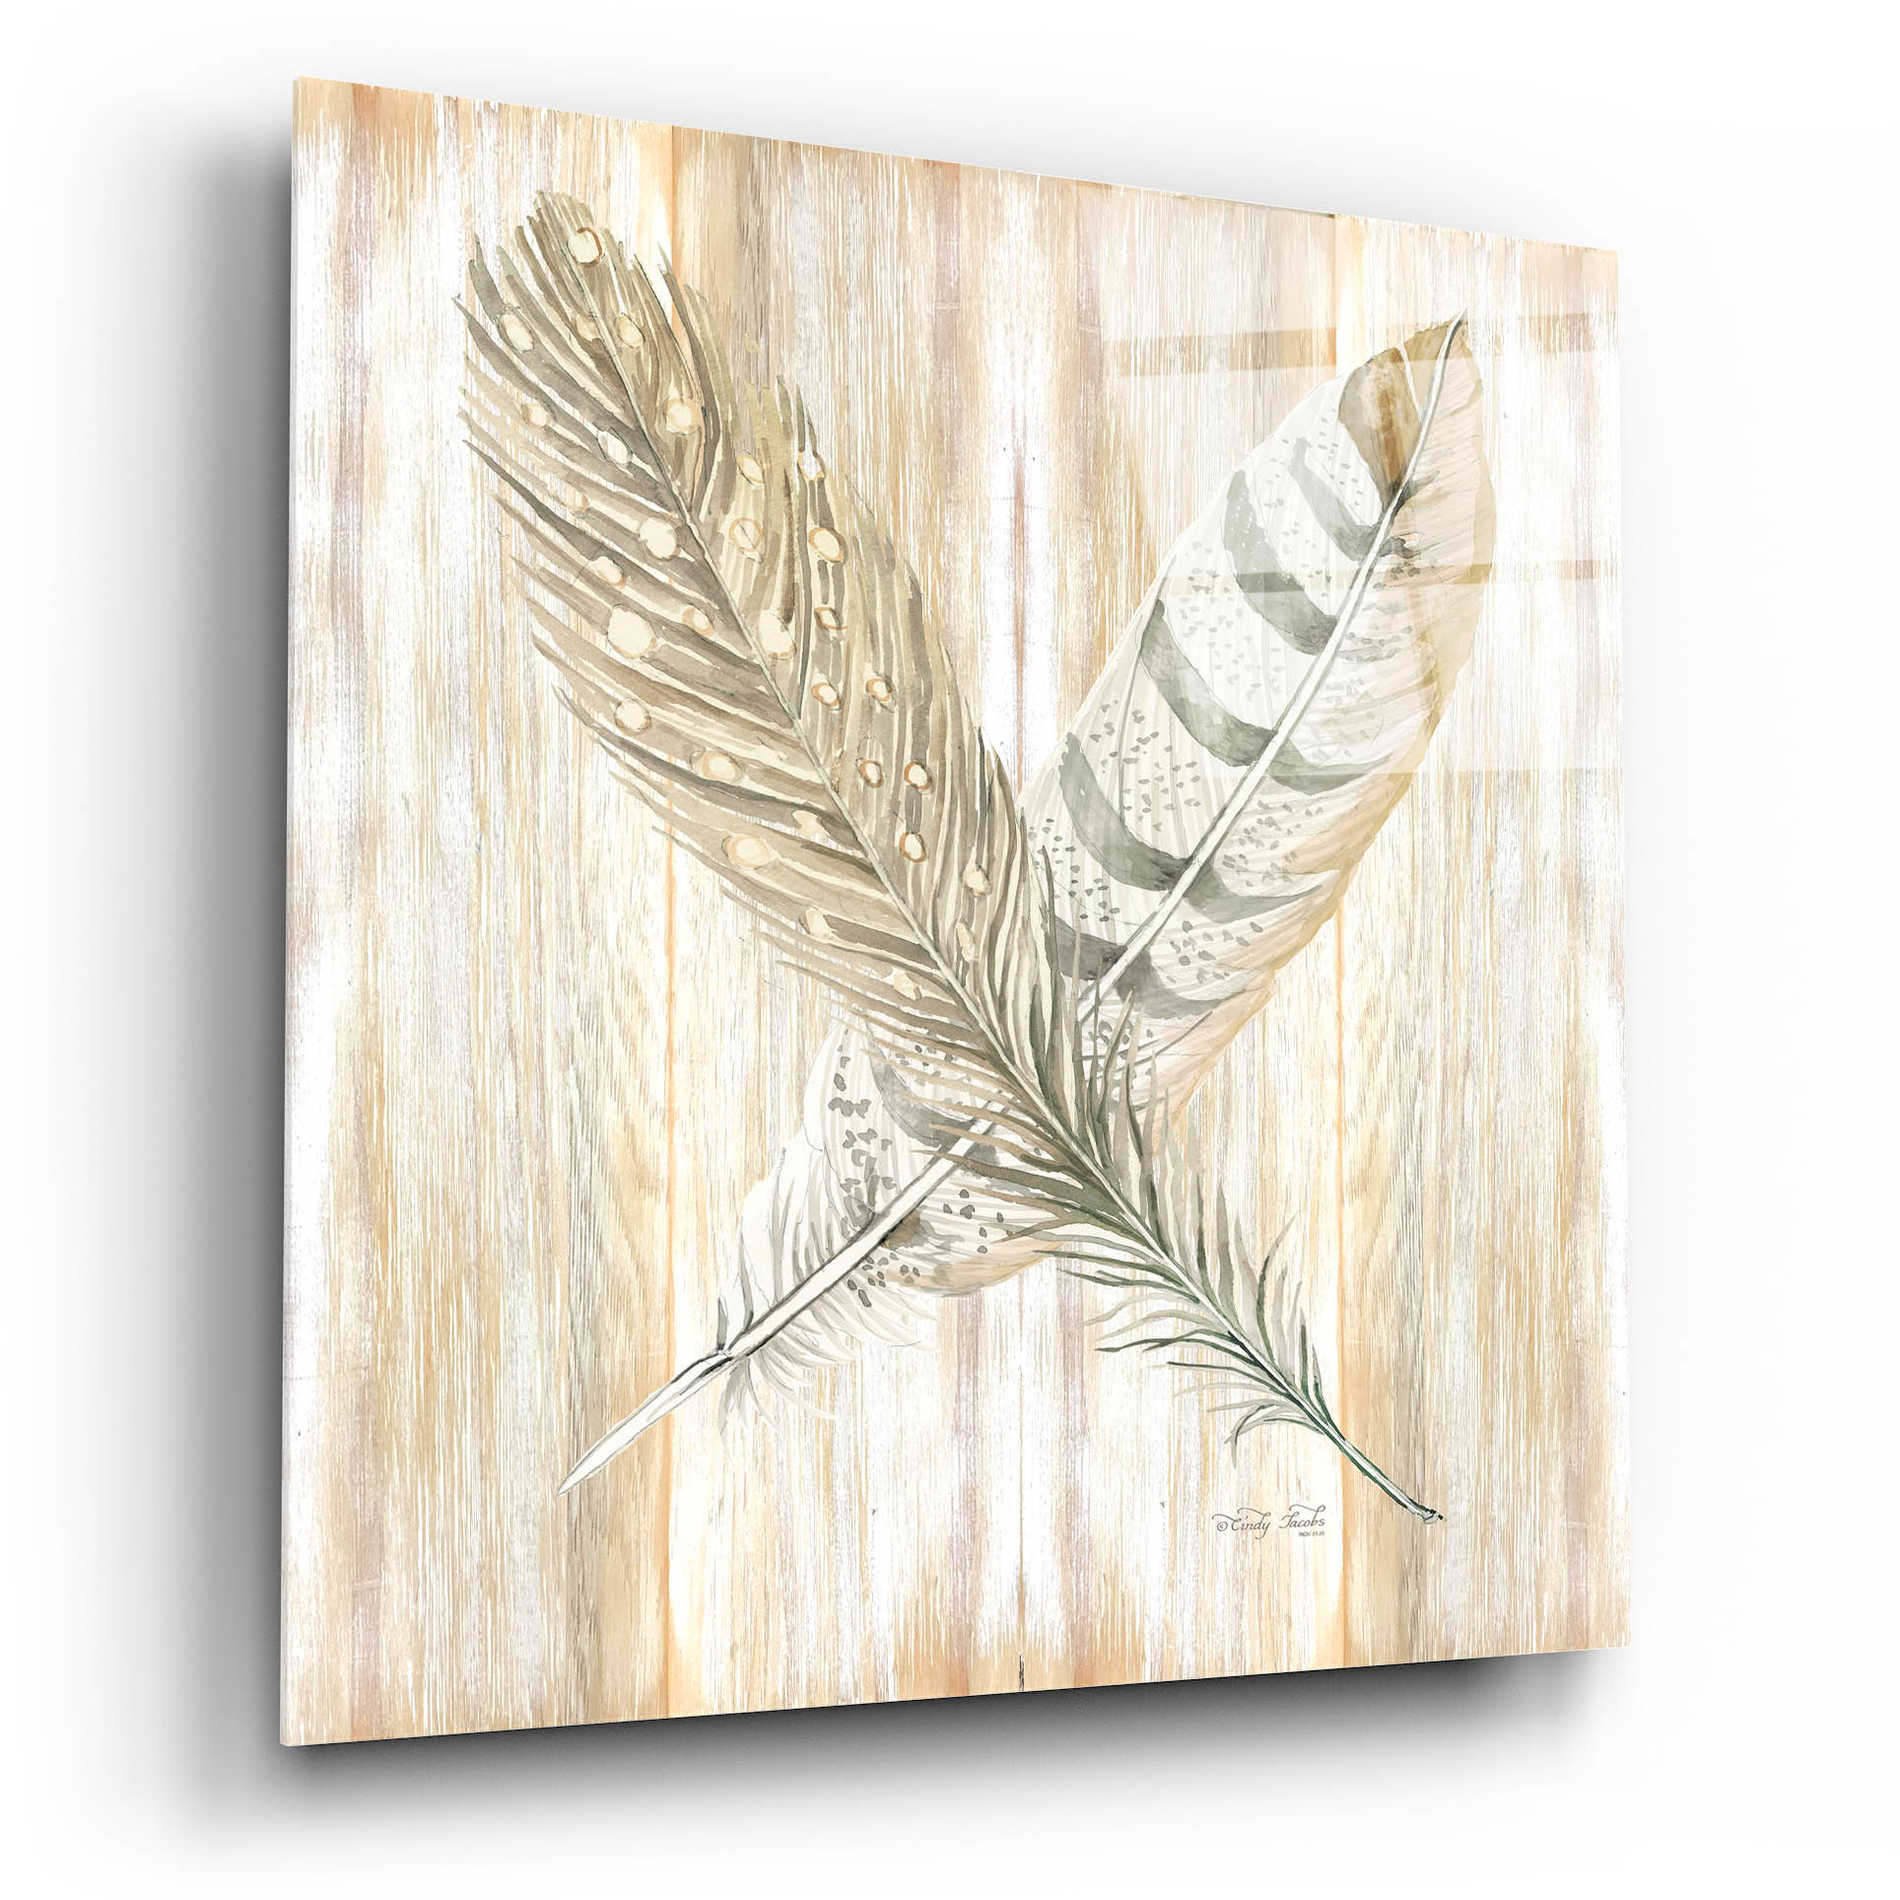 Epic Art 'Feathers Crossed II' by Cindy Jacobs, Acrylic Glass Wall Art,12x12